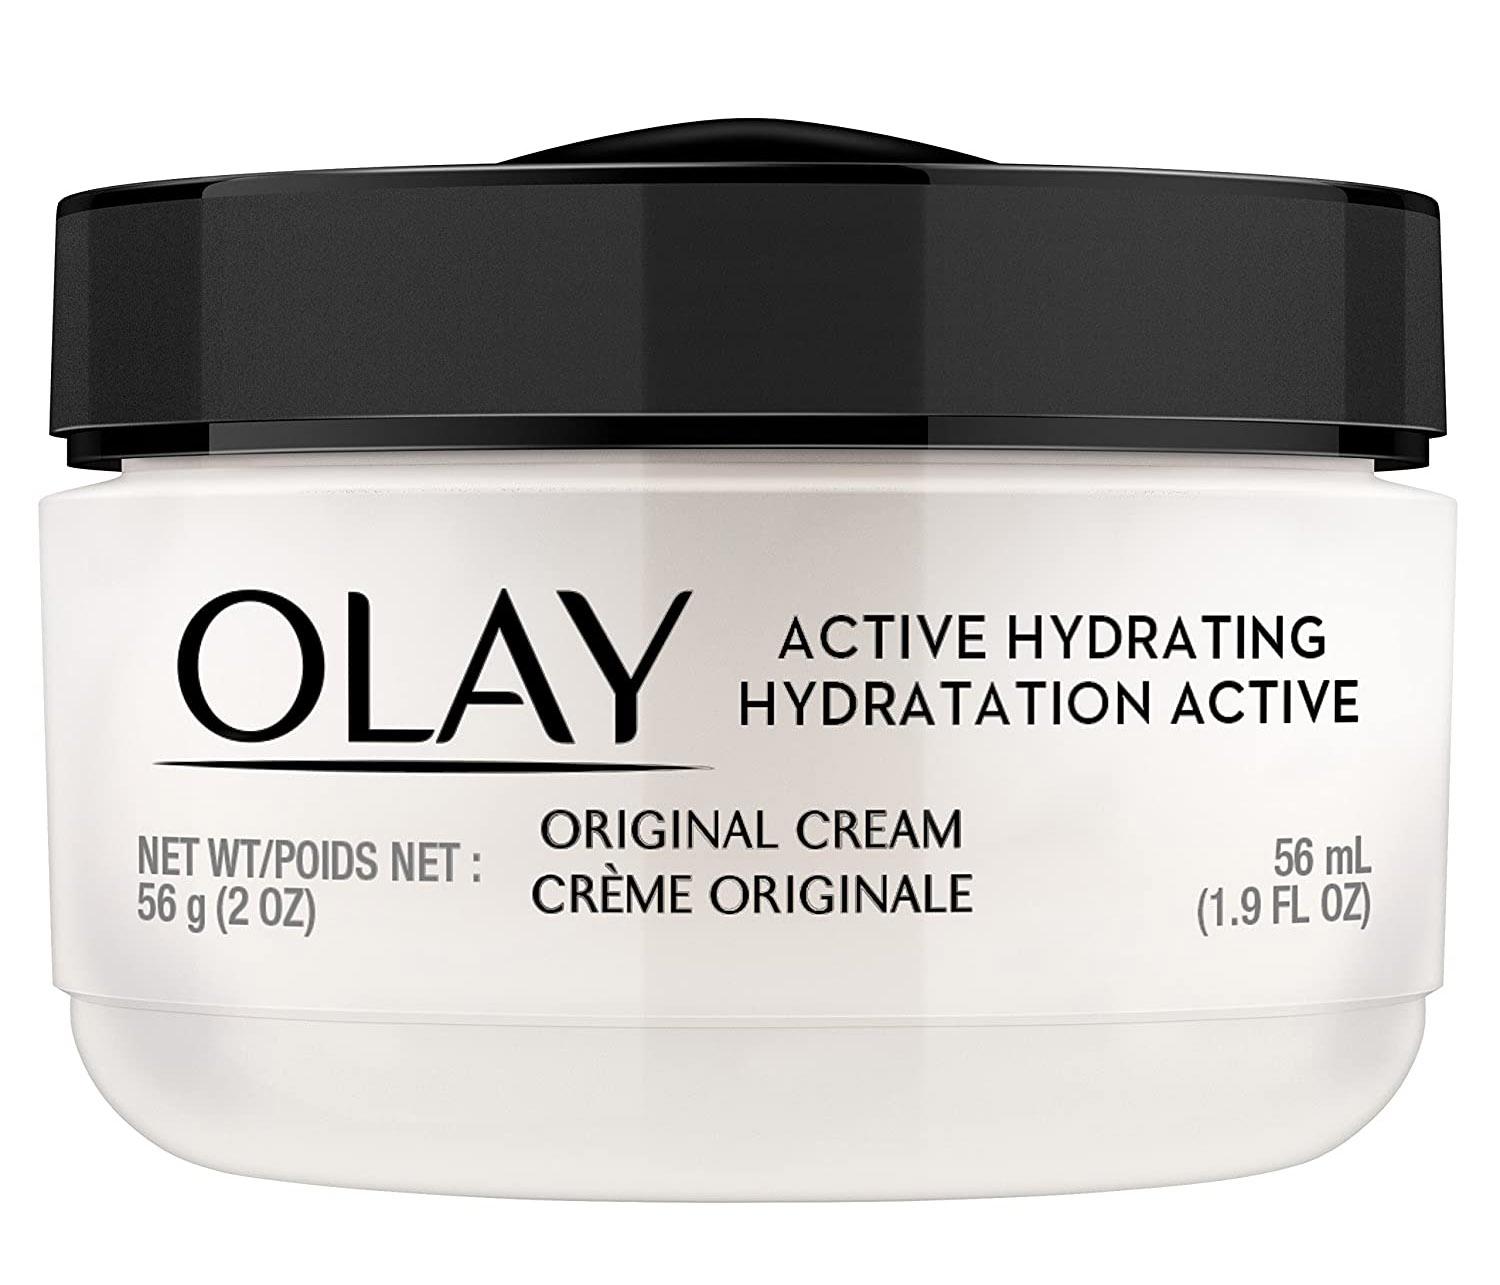 1.9oz Olay Active Hydrating Cream Face Moisturizer for $4.32 Shipped